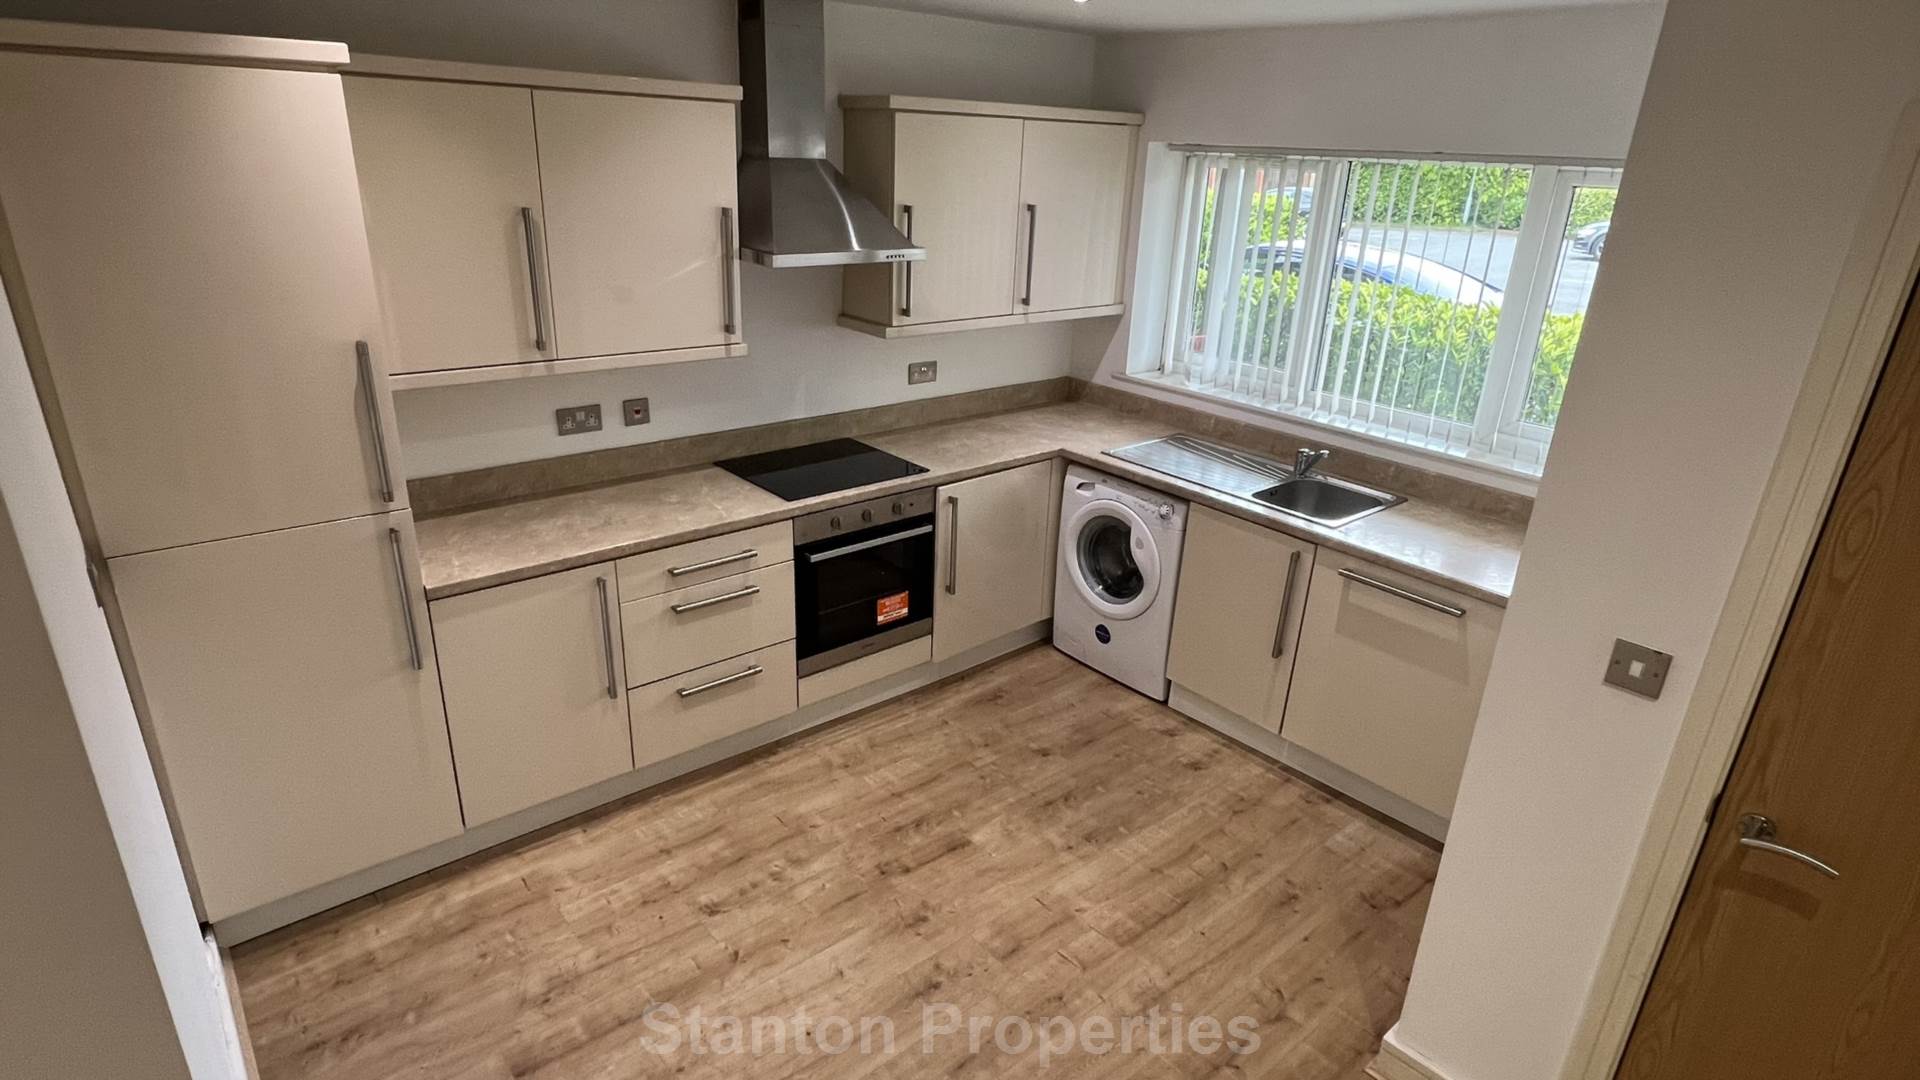 2 bed Apartment for rent in St Helens. From Stanton Properties